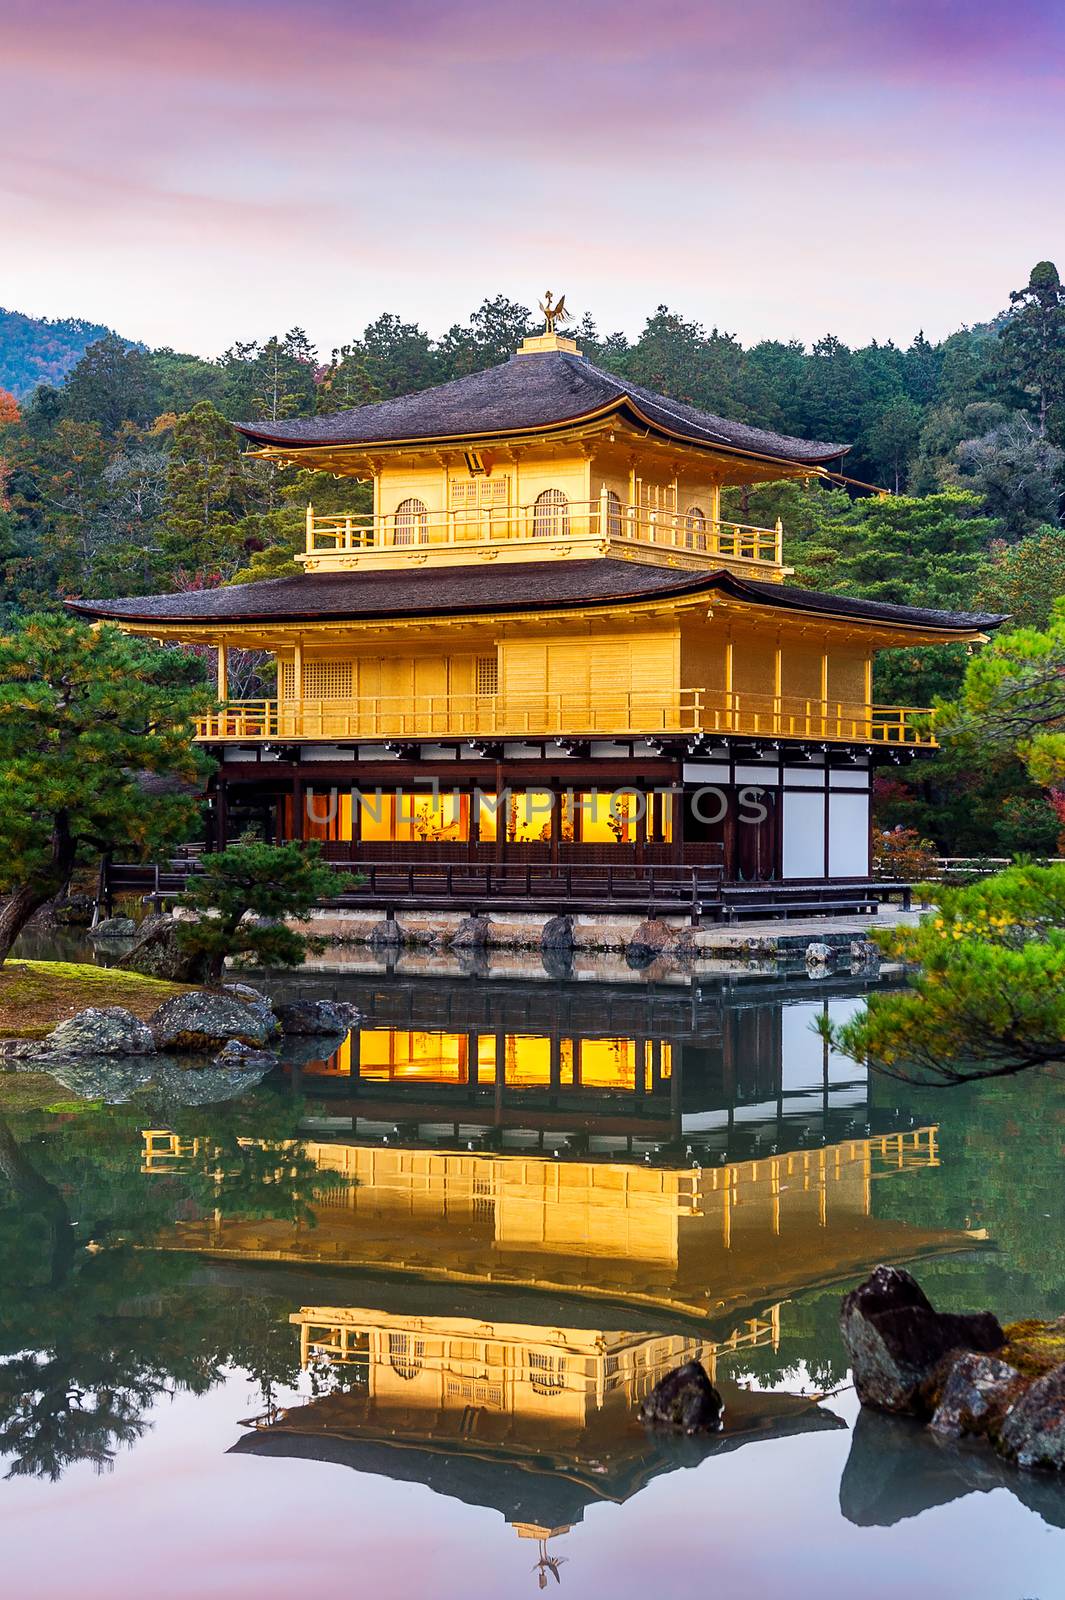 The Golden Pavilion. Kinkakuji Temple in Kyoto, Japan. by gutarphotoghaphy